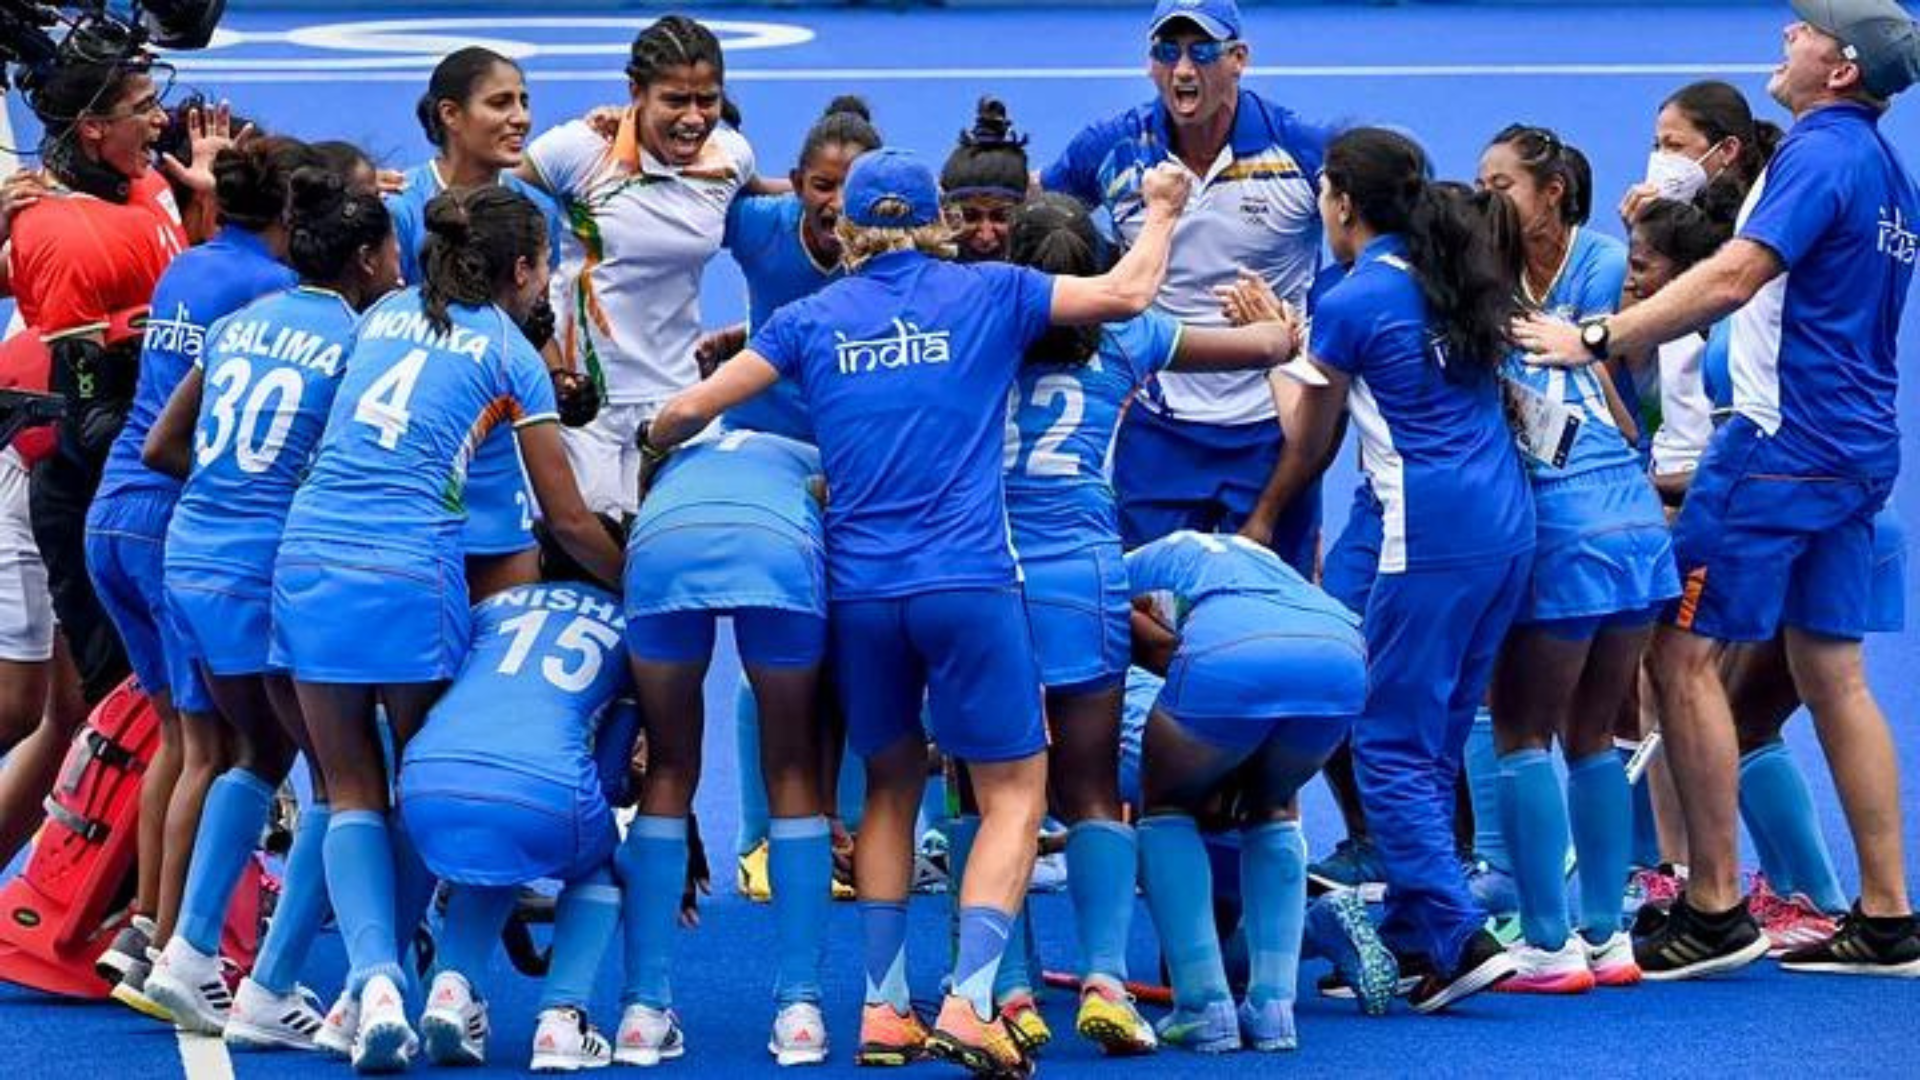 Empowering Victory: India’s Inspiring Women’s Hockey Team Targets Italy to Fuel Paris Dreams - Post Image